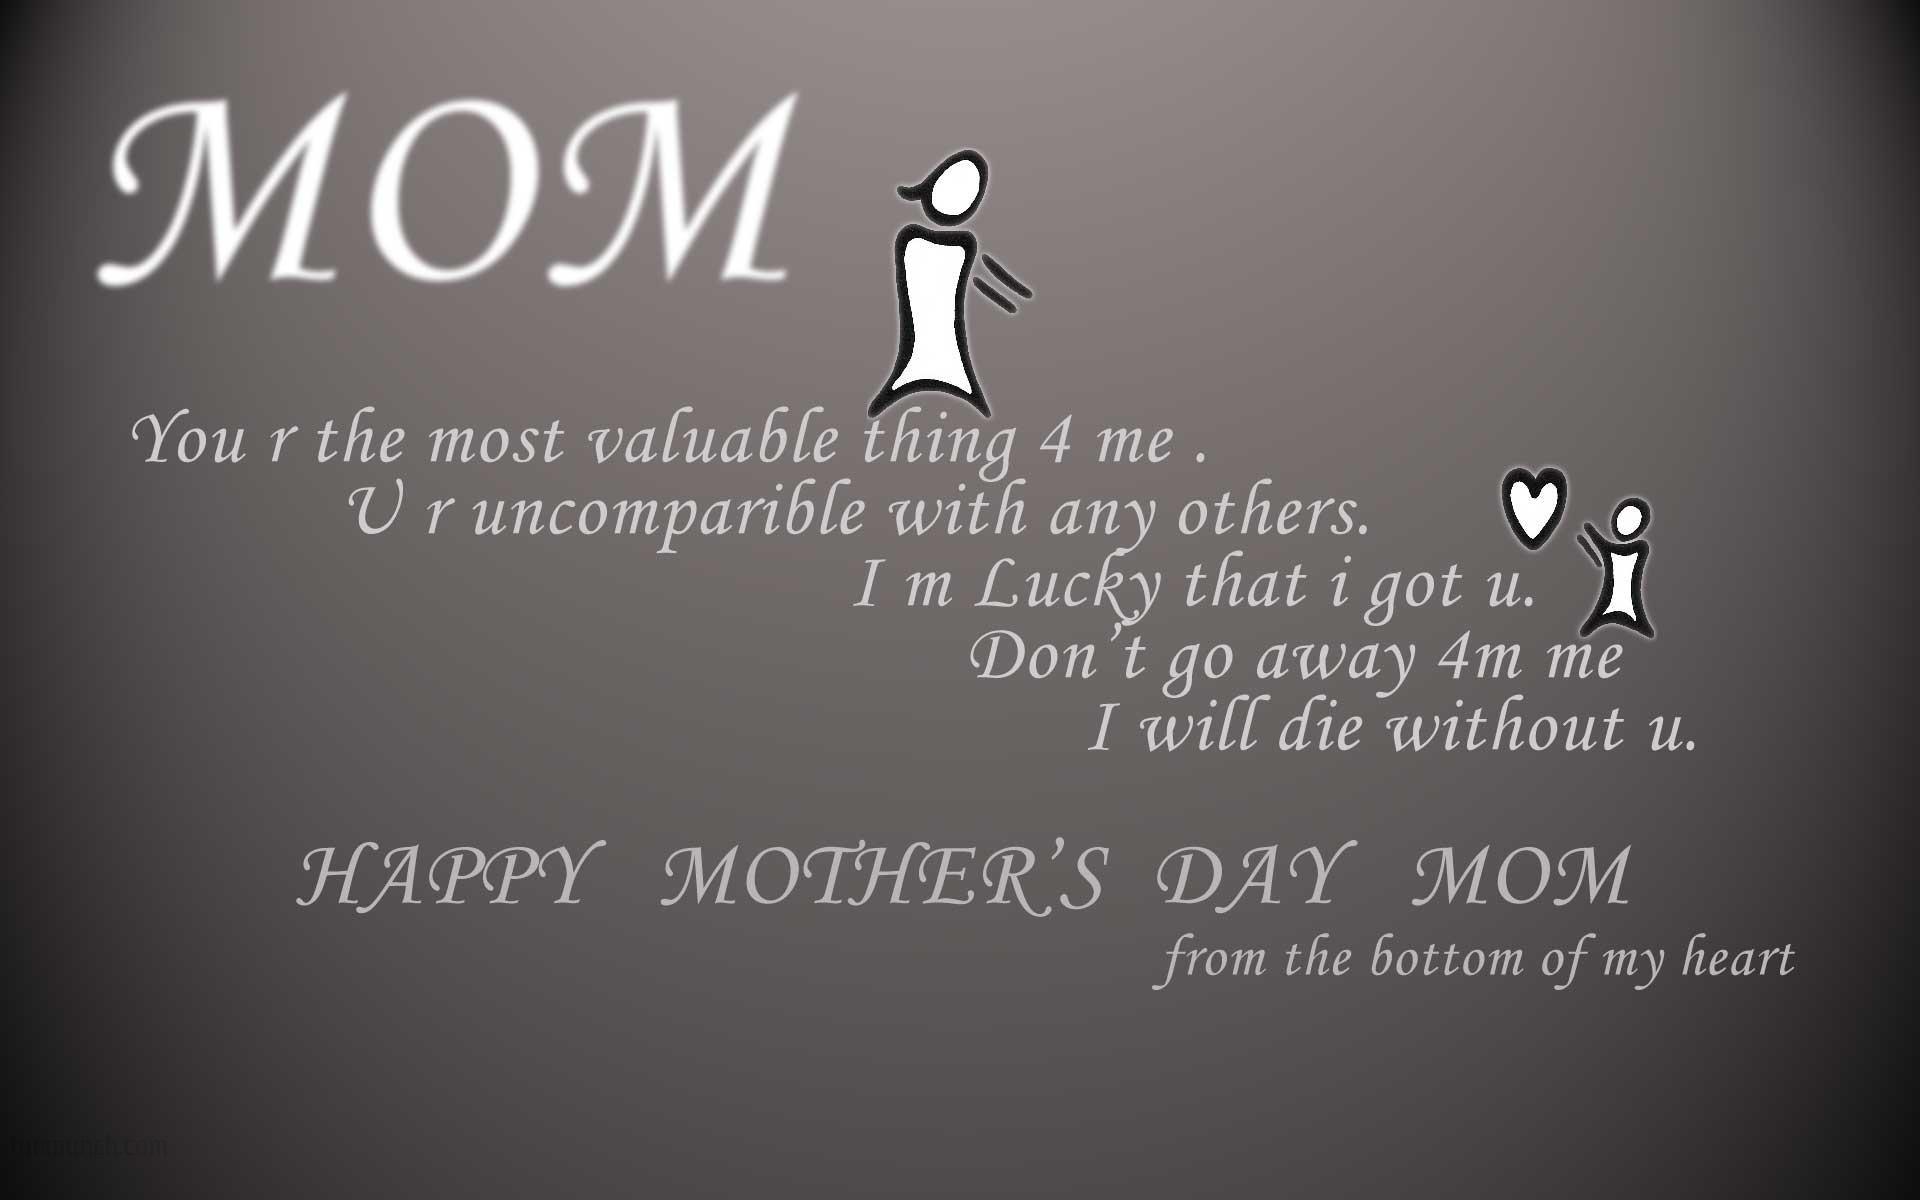 Mothers Day Sayings Wallpaper High Definition Quality